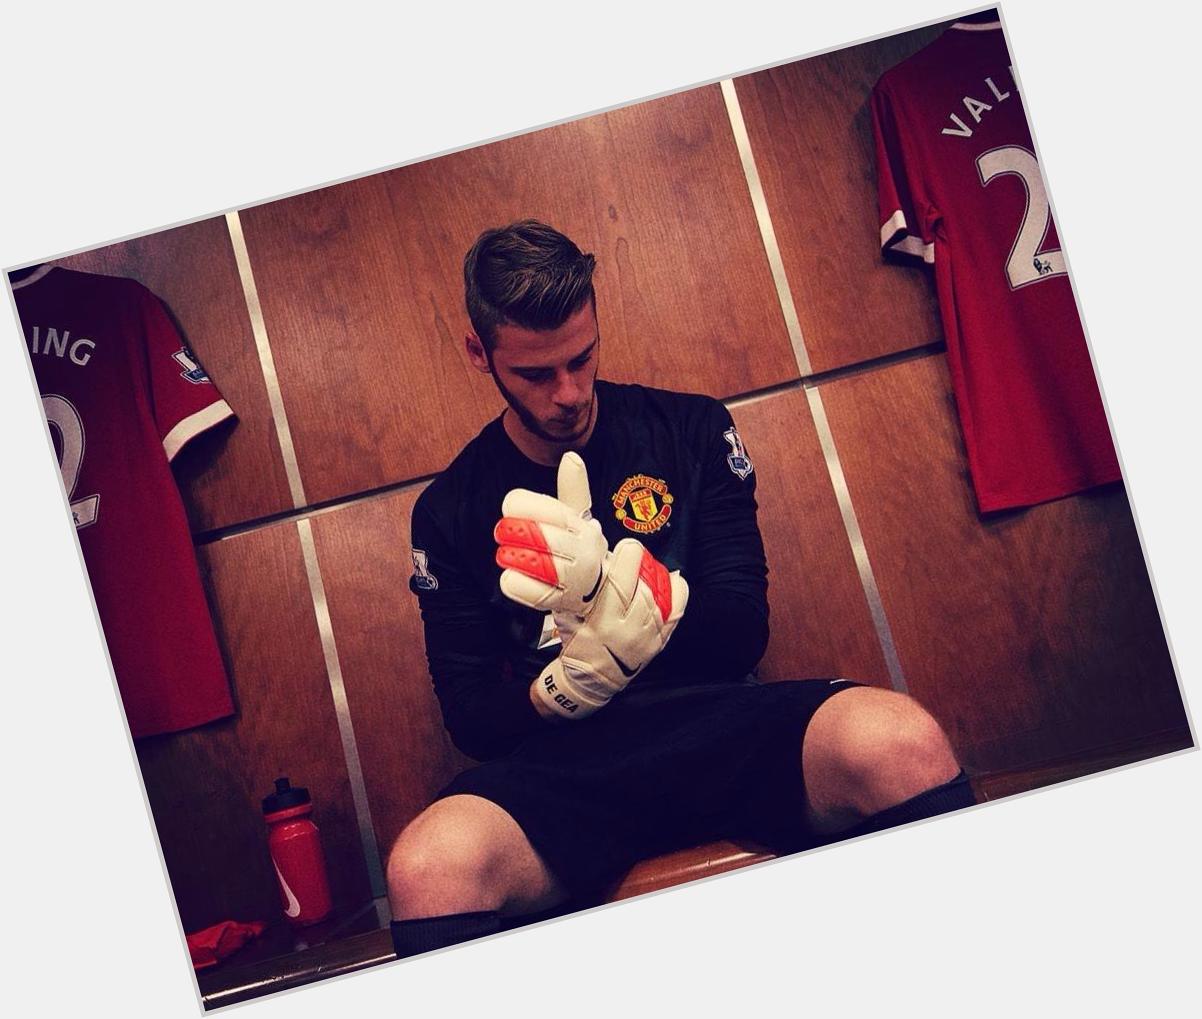 Happy Birthday World bestest David De GEa, You make us proud Champion! A clean sheet for you this weekend.